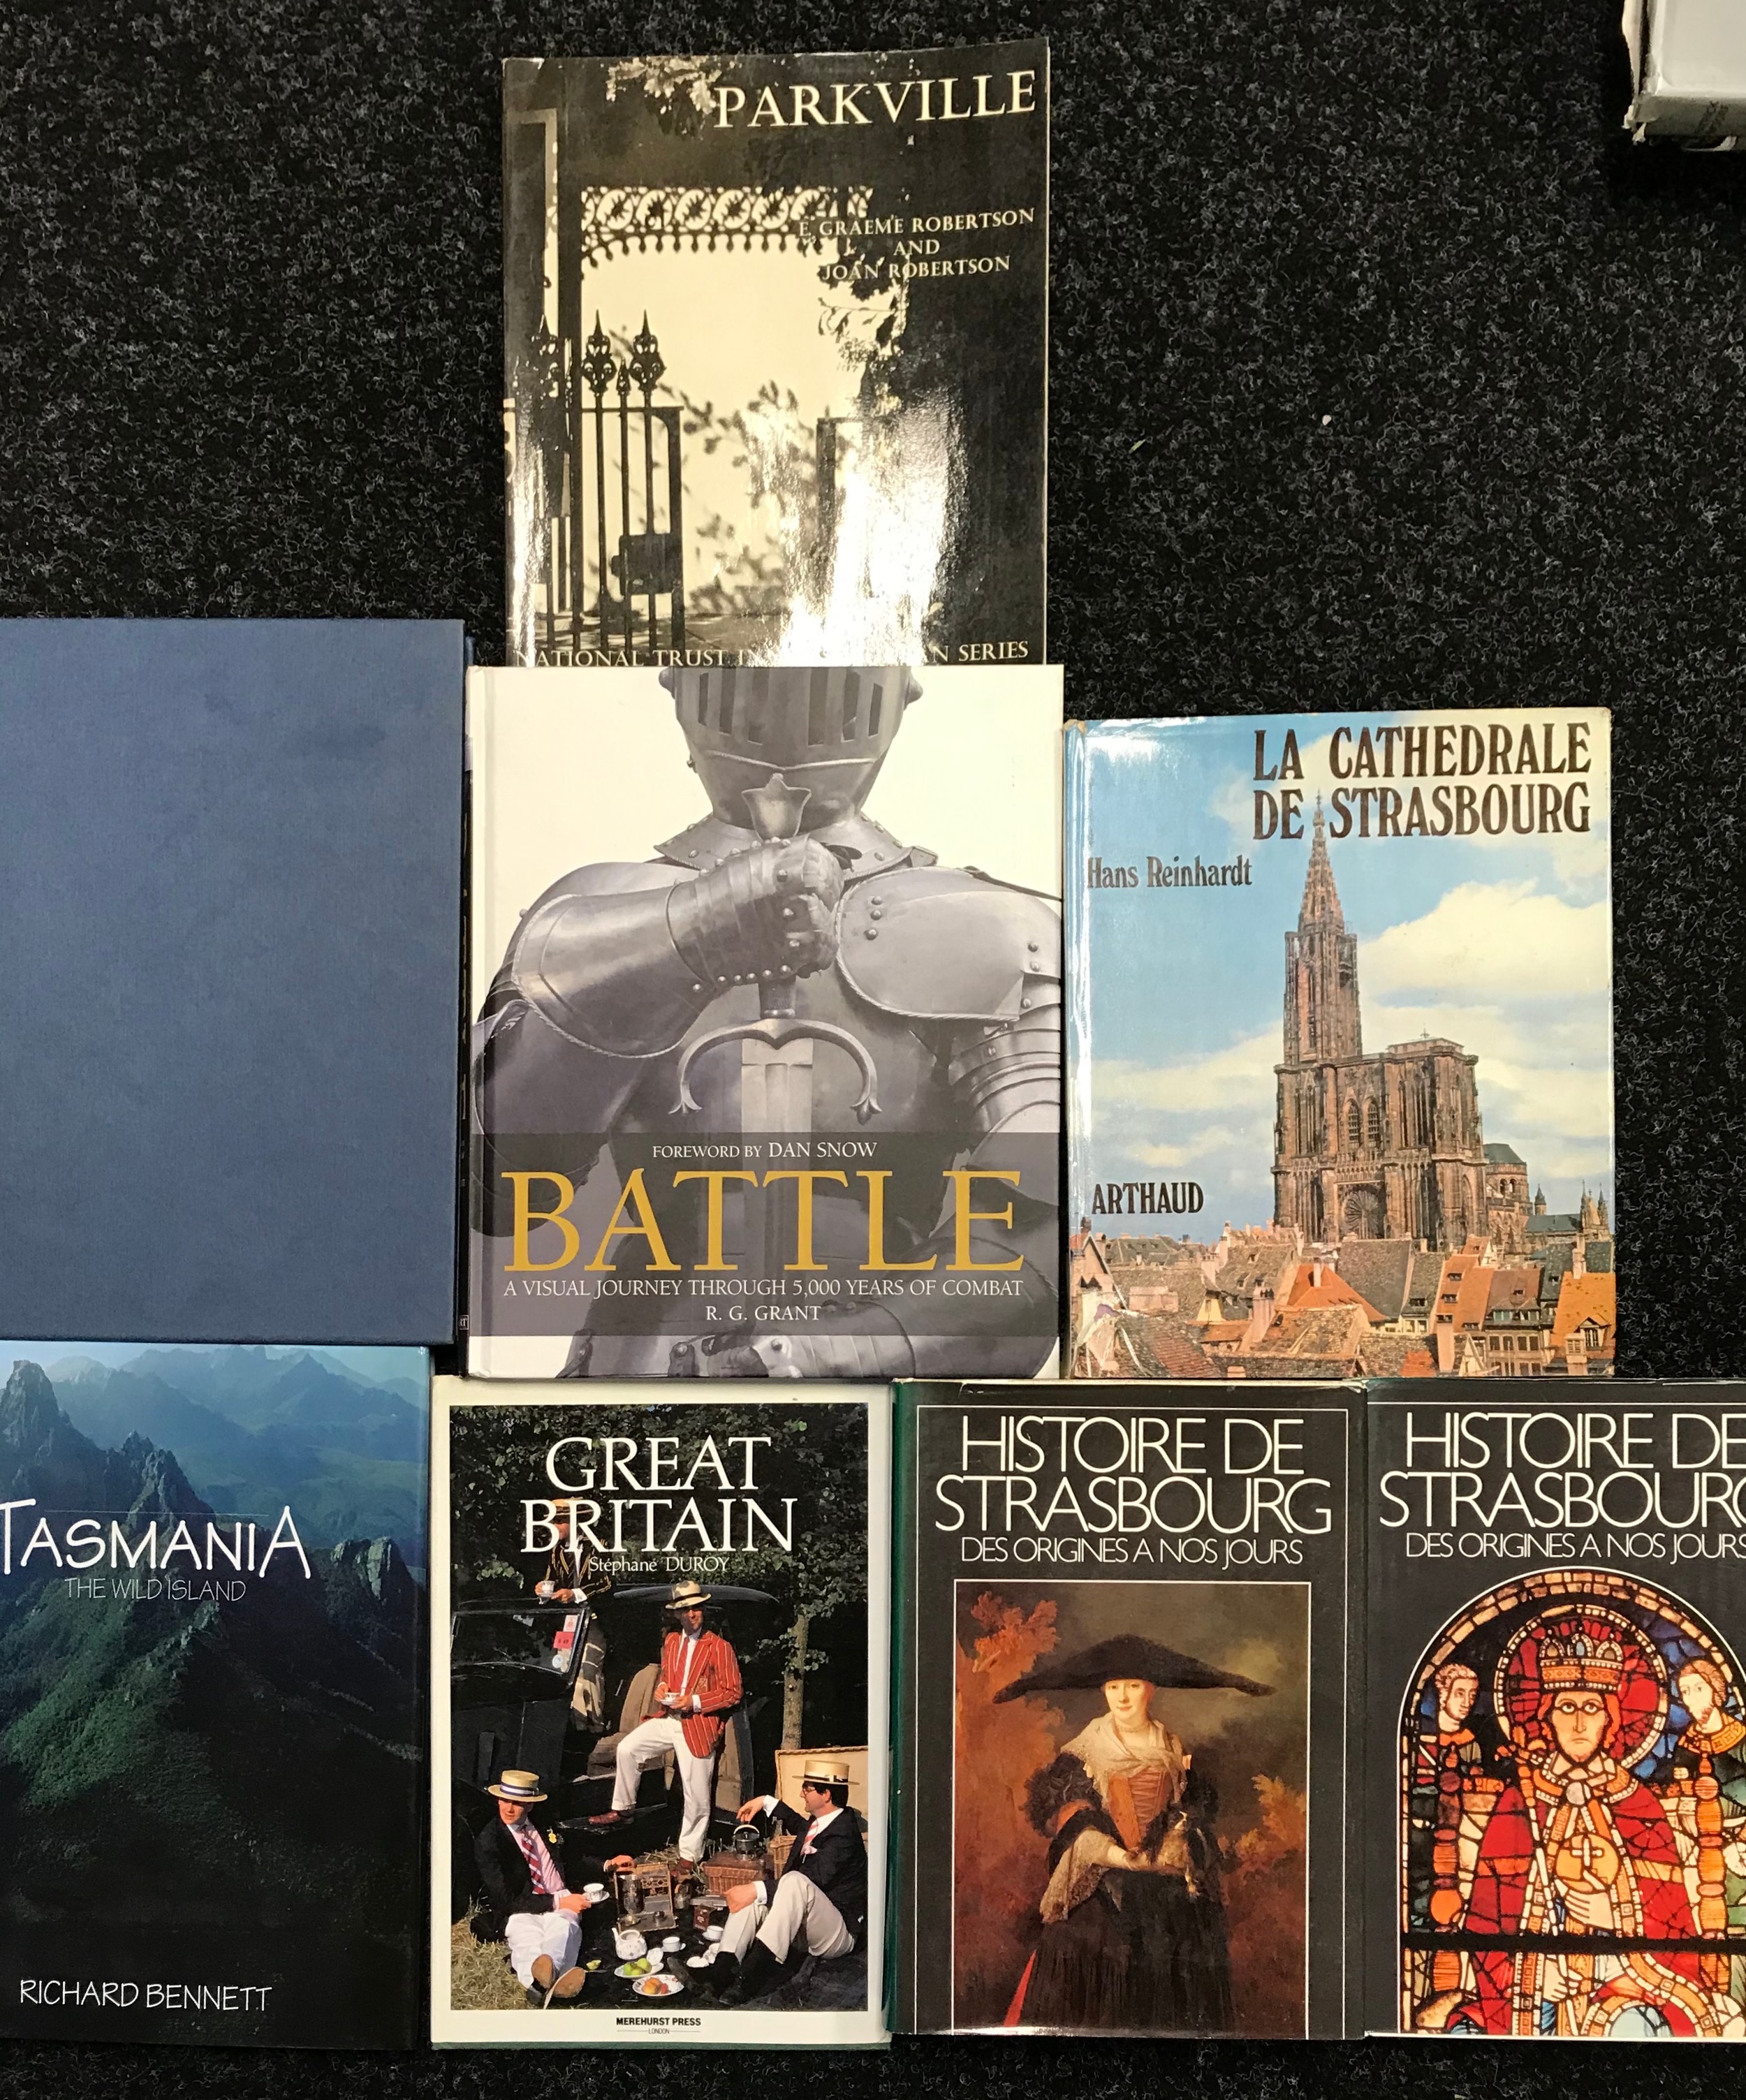 Nine books with topics History, Great Britain, Atlas of The World, 5000 Years of Battles etc